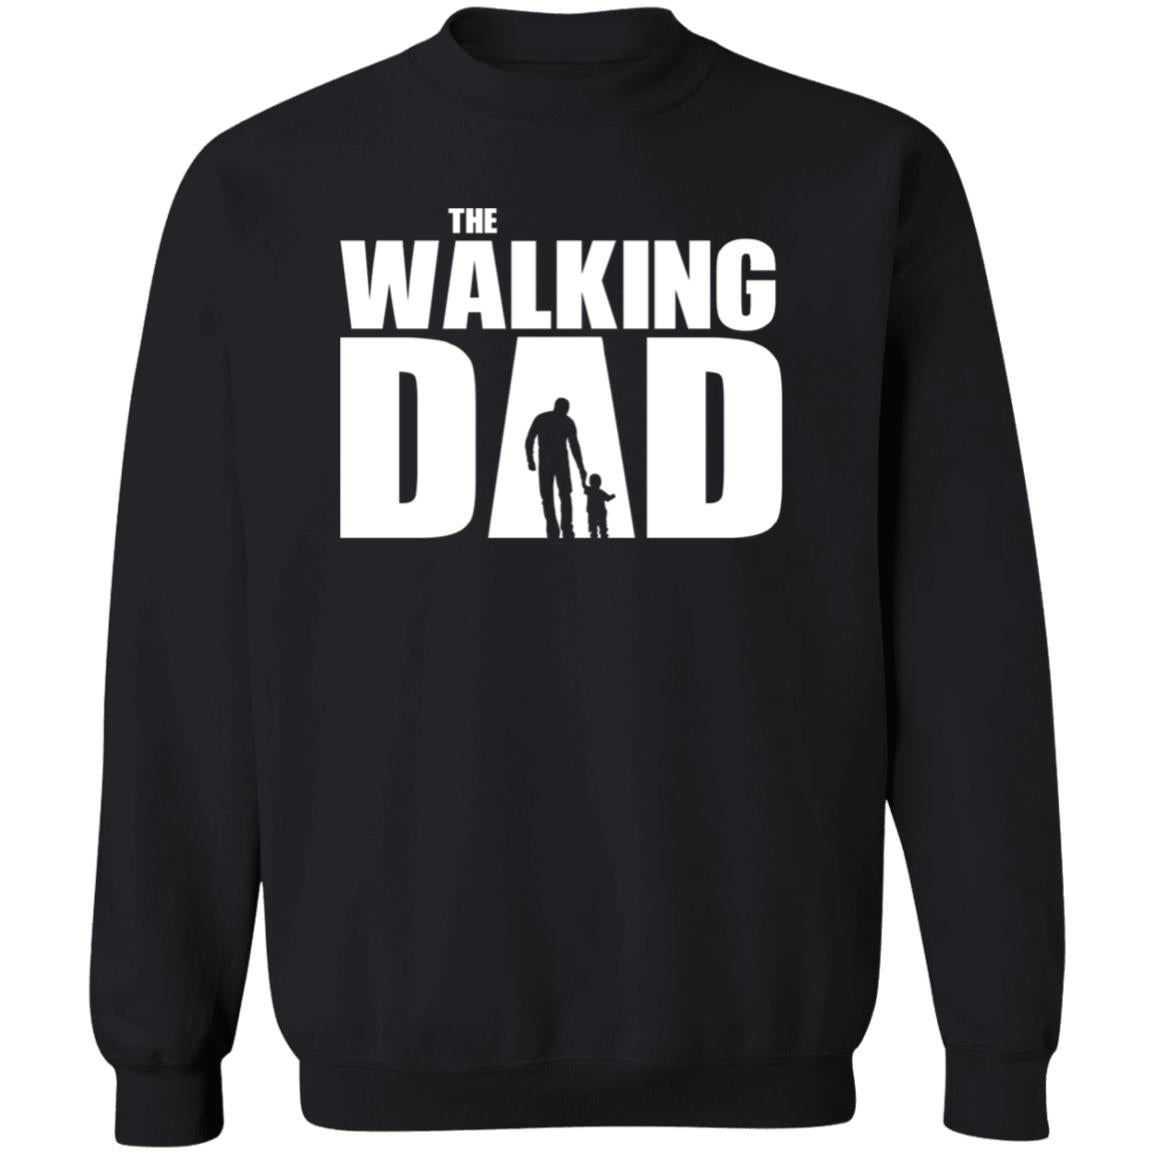 The Walking Dad of 1 in White